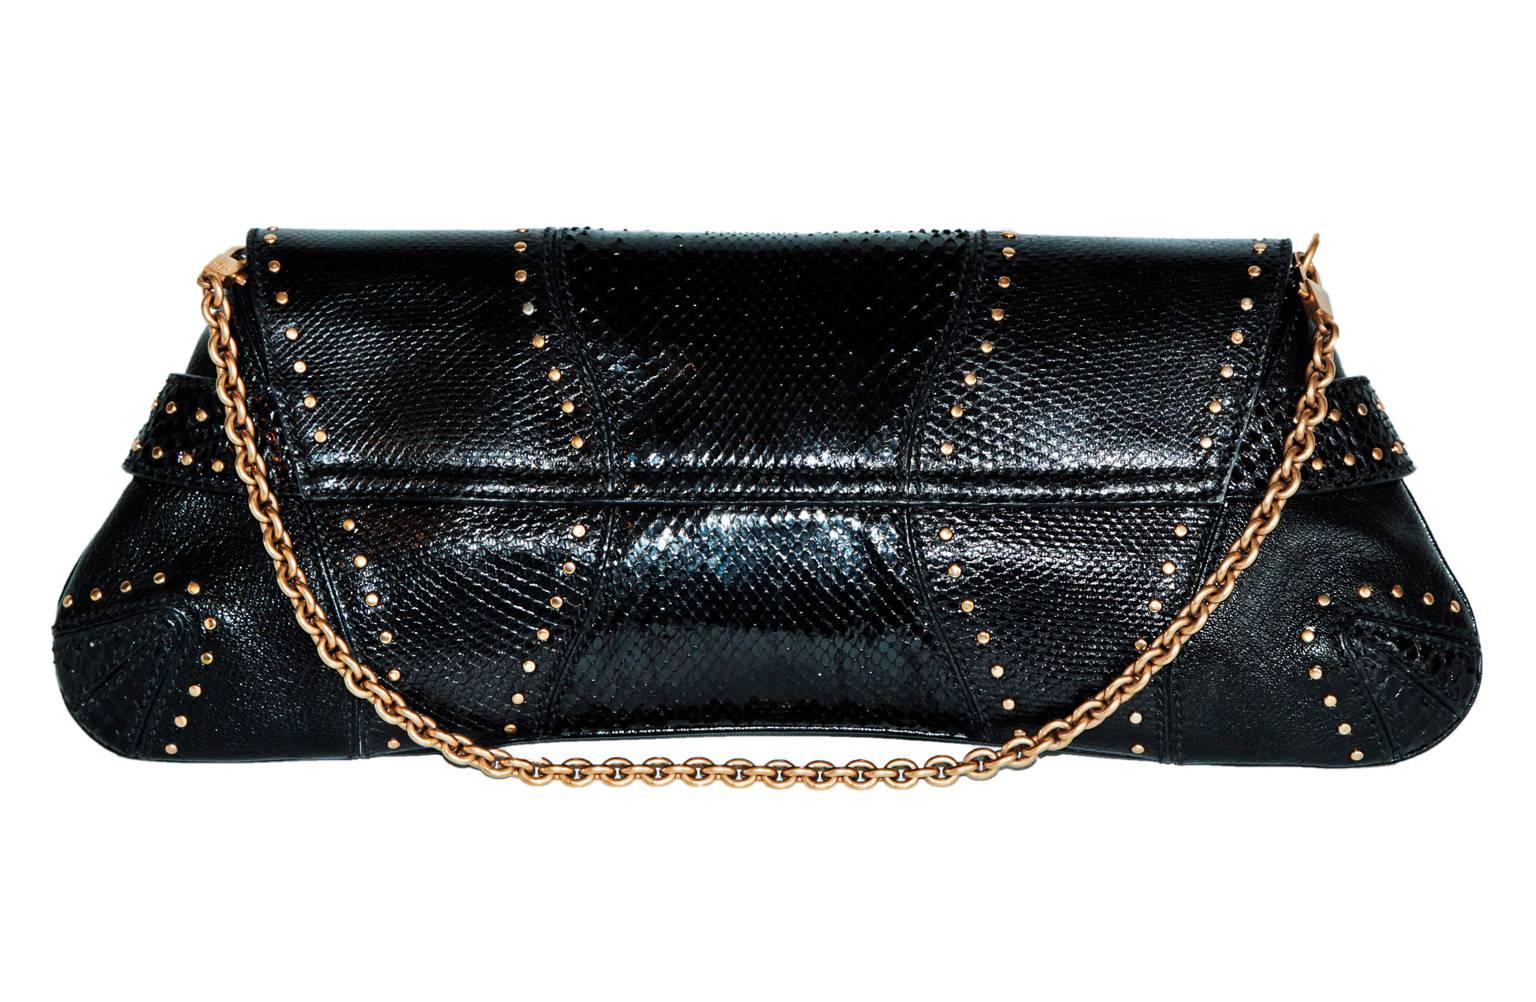 That Incredible Black Python Horsebit Bag From Tom Ford Gucci FW 2003 Collection!

This amazing bag has only been used a handful of times & is in very good condition with only minimal signs of wear throughout... an absolute must for Ford buyers &